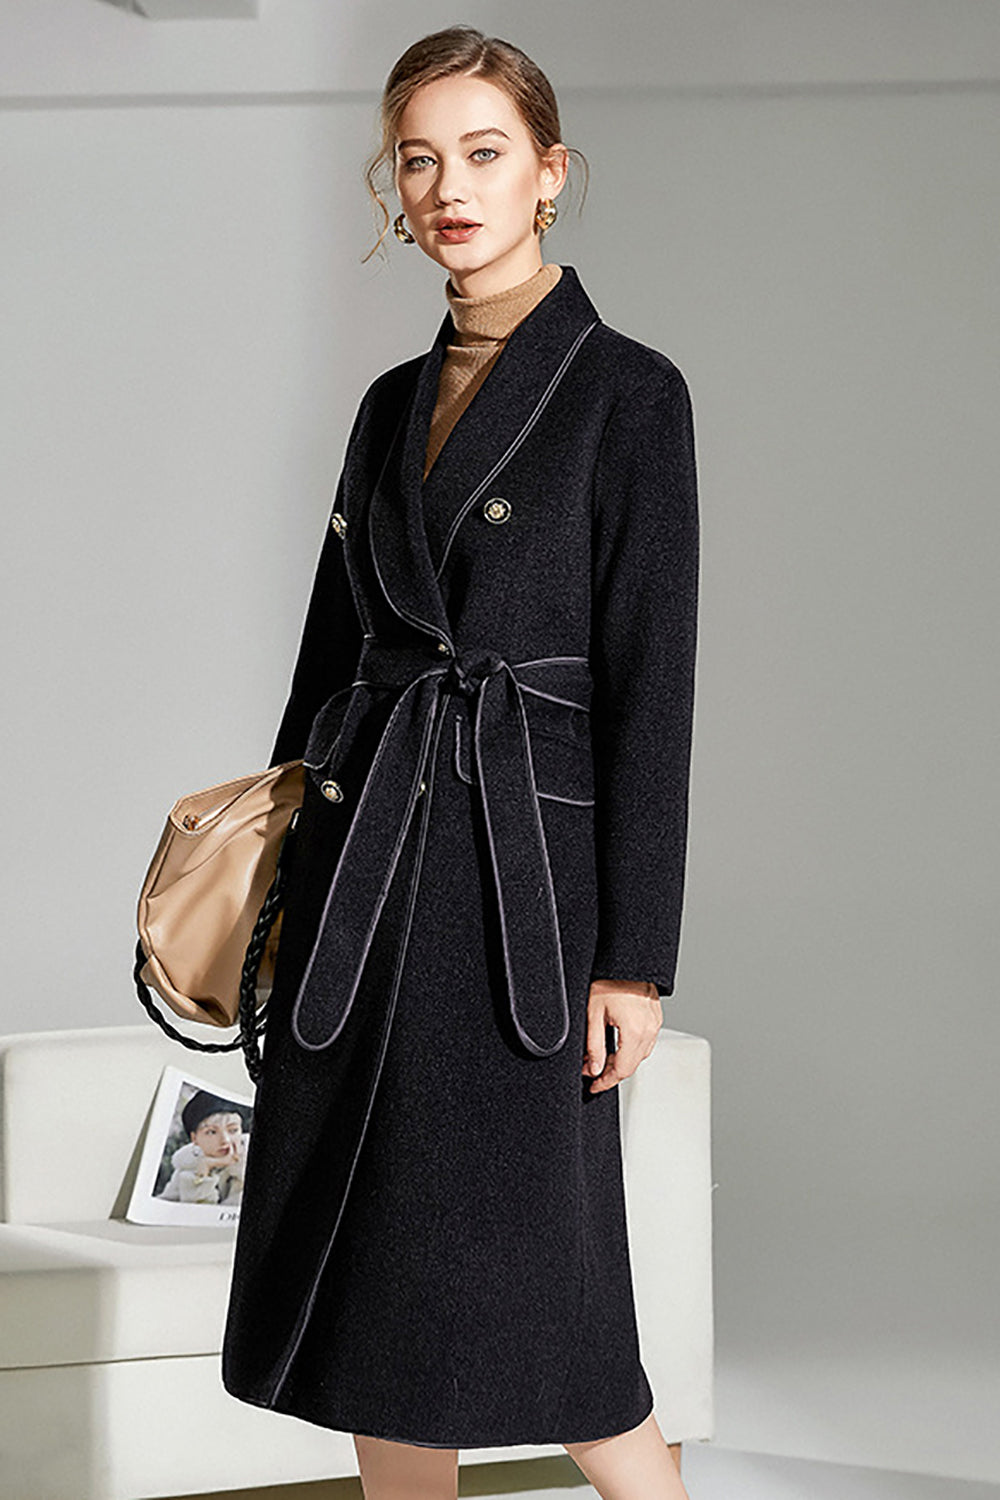 Black Double Breasted Lapel Neck Long Wool Coat with Belt